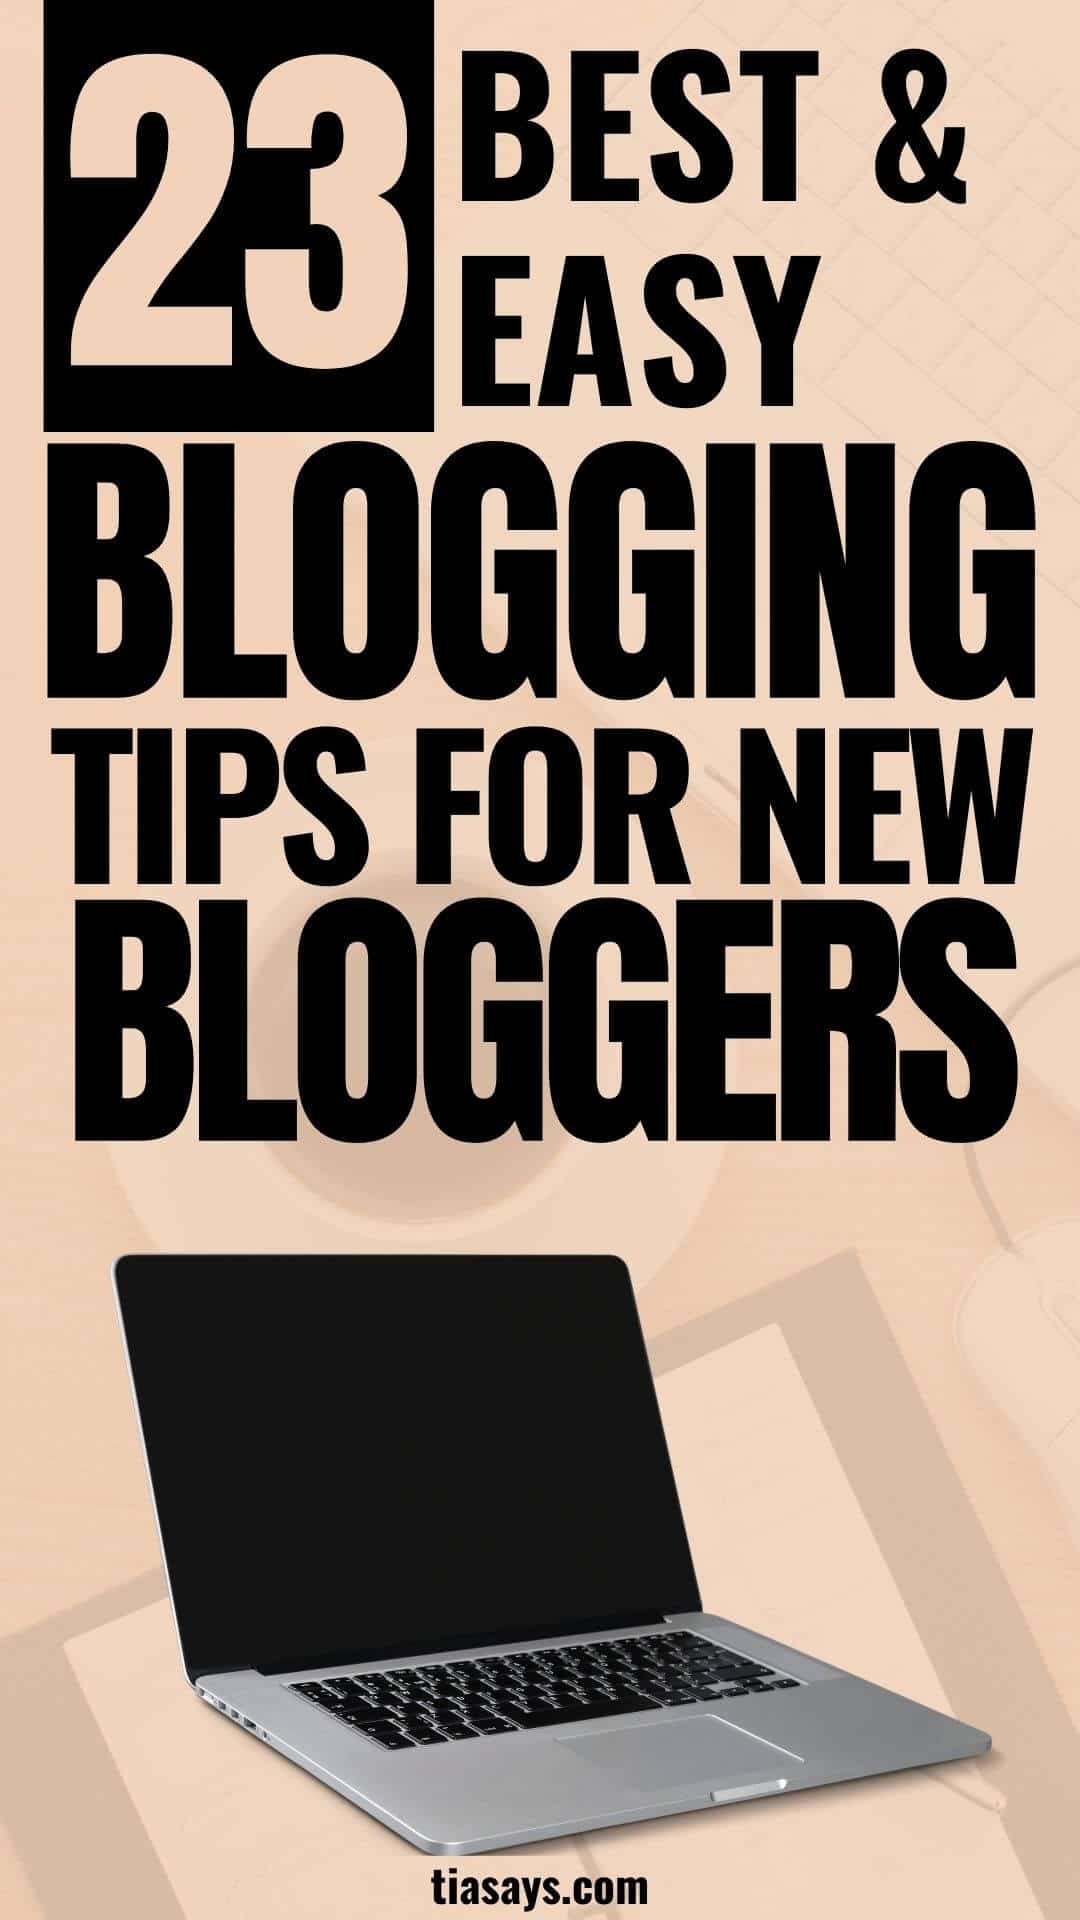 Blogging tips for newbies